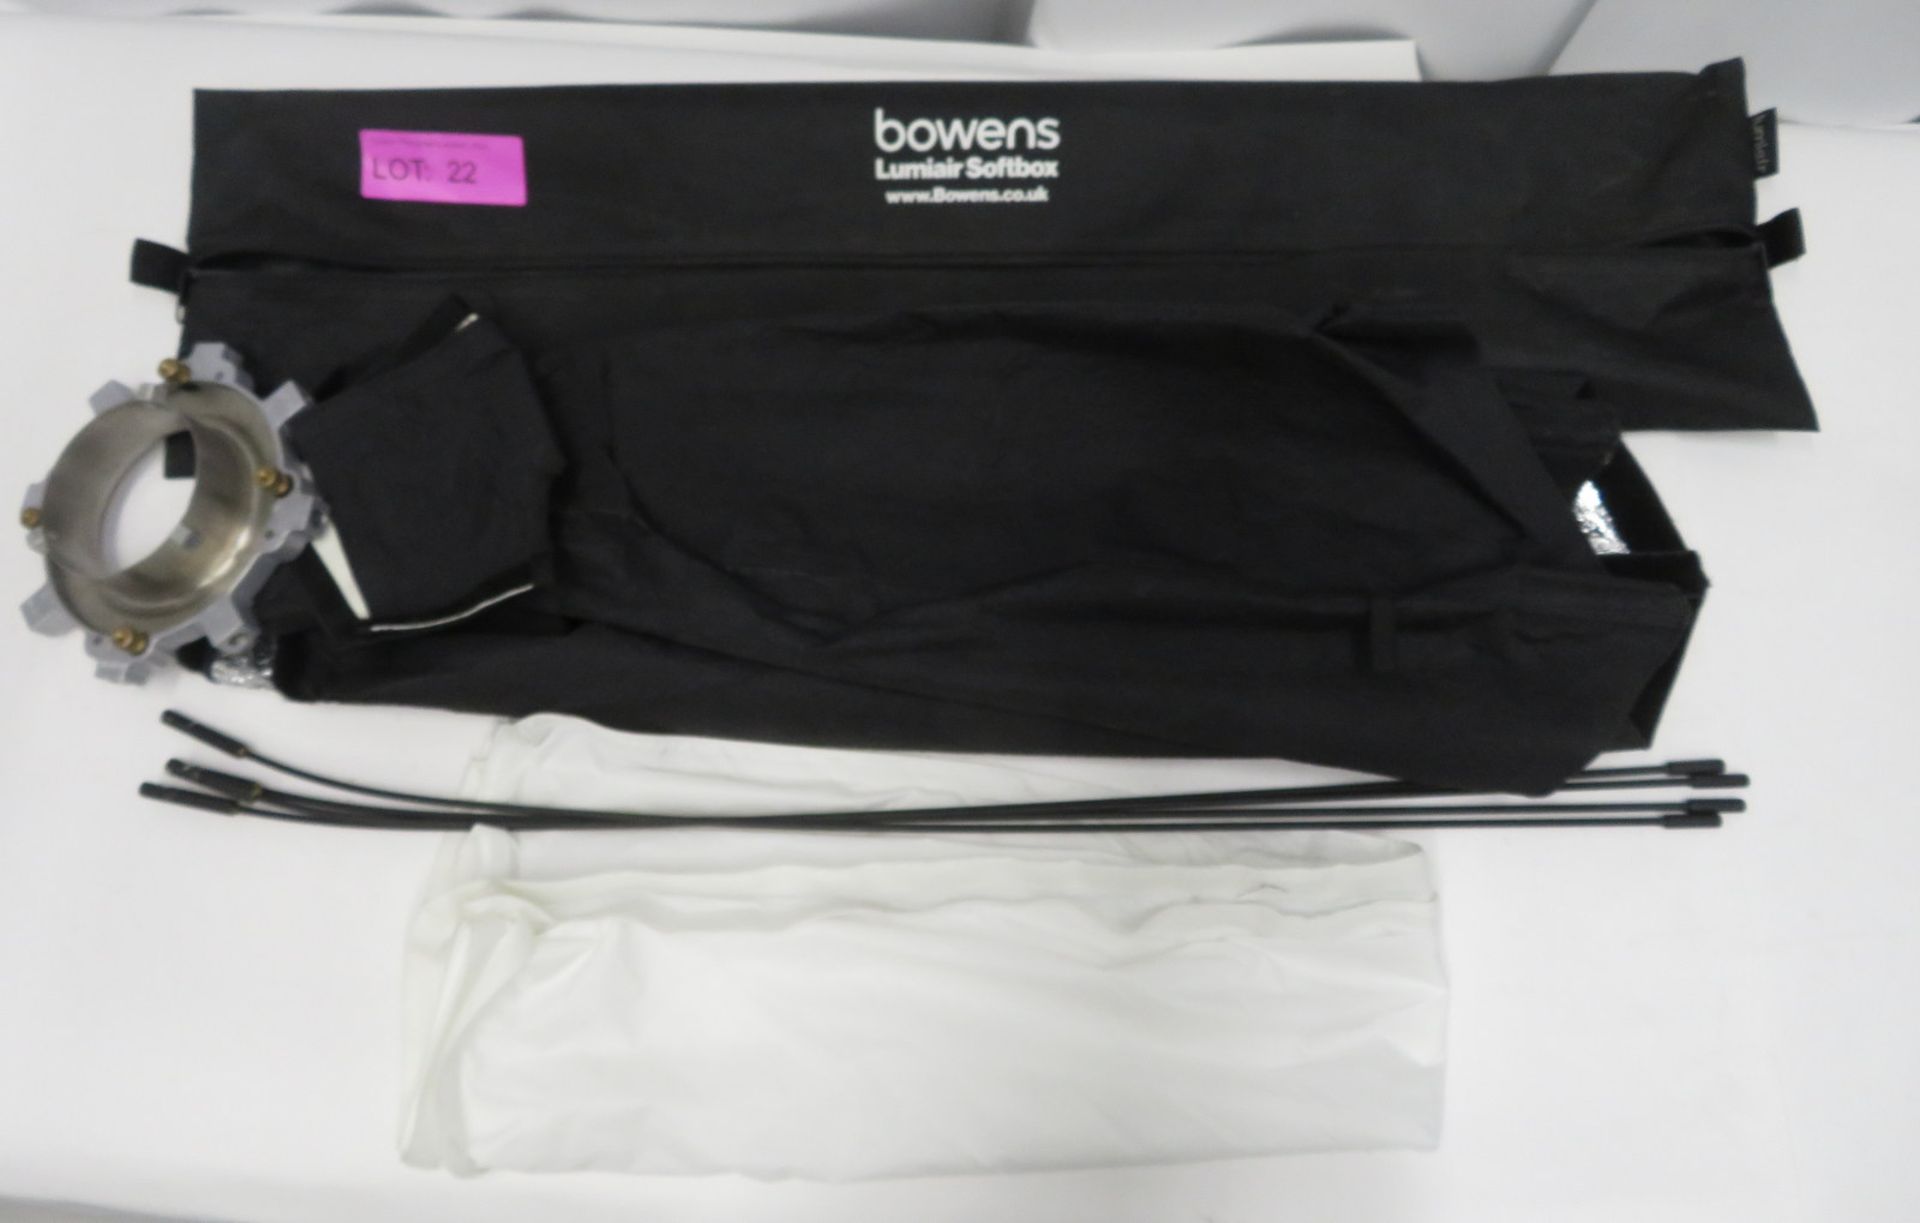 Bowens 1m x 1m softbox attachment for studio light in carry bag - Image 2 of 7